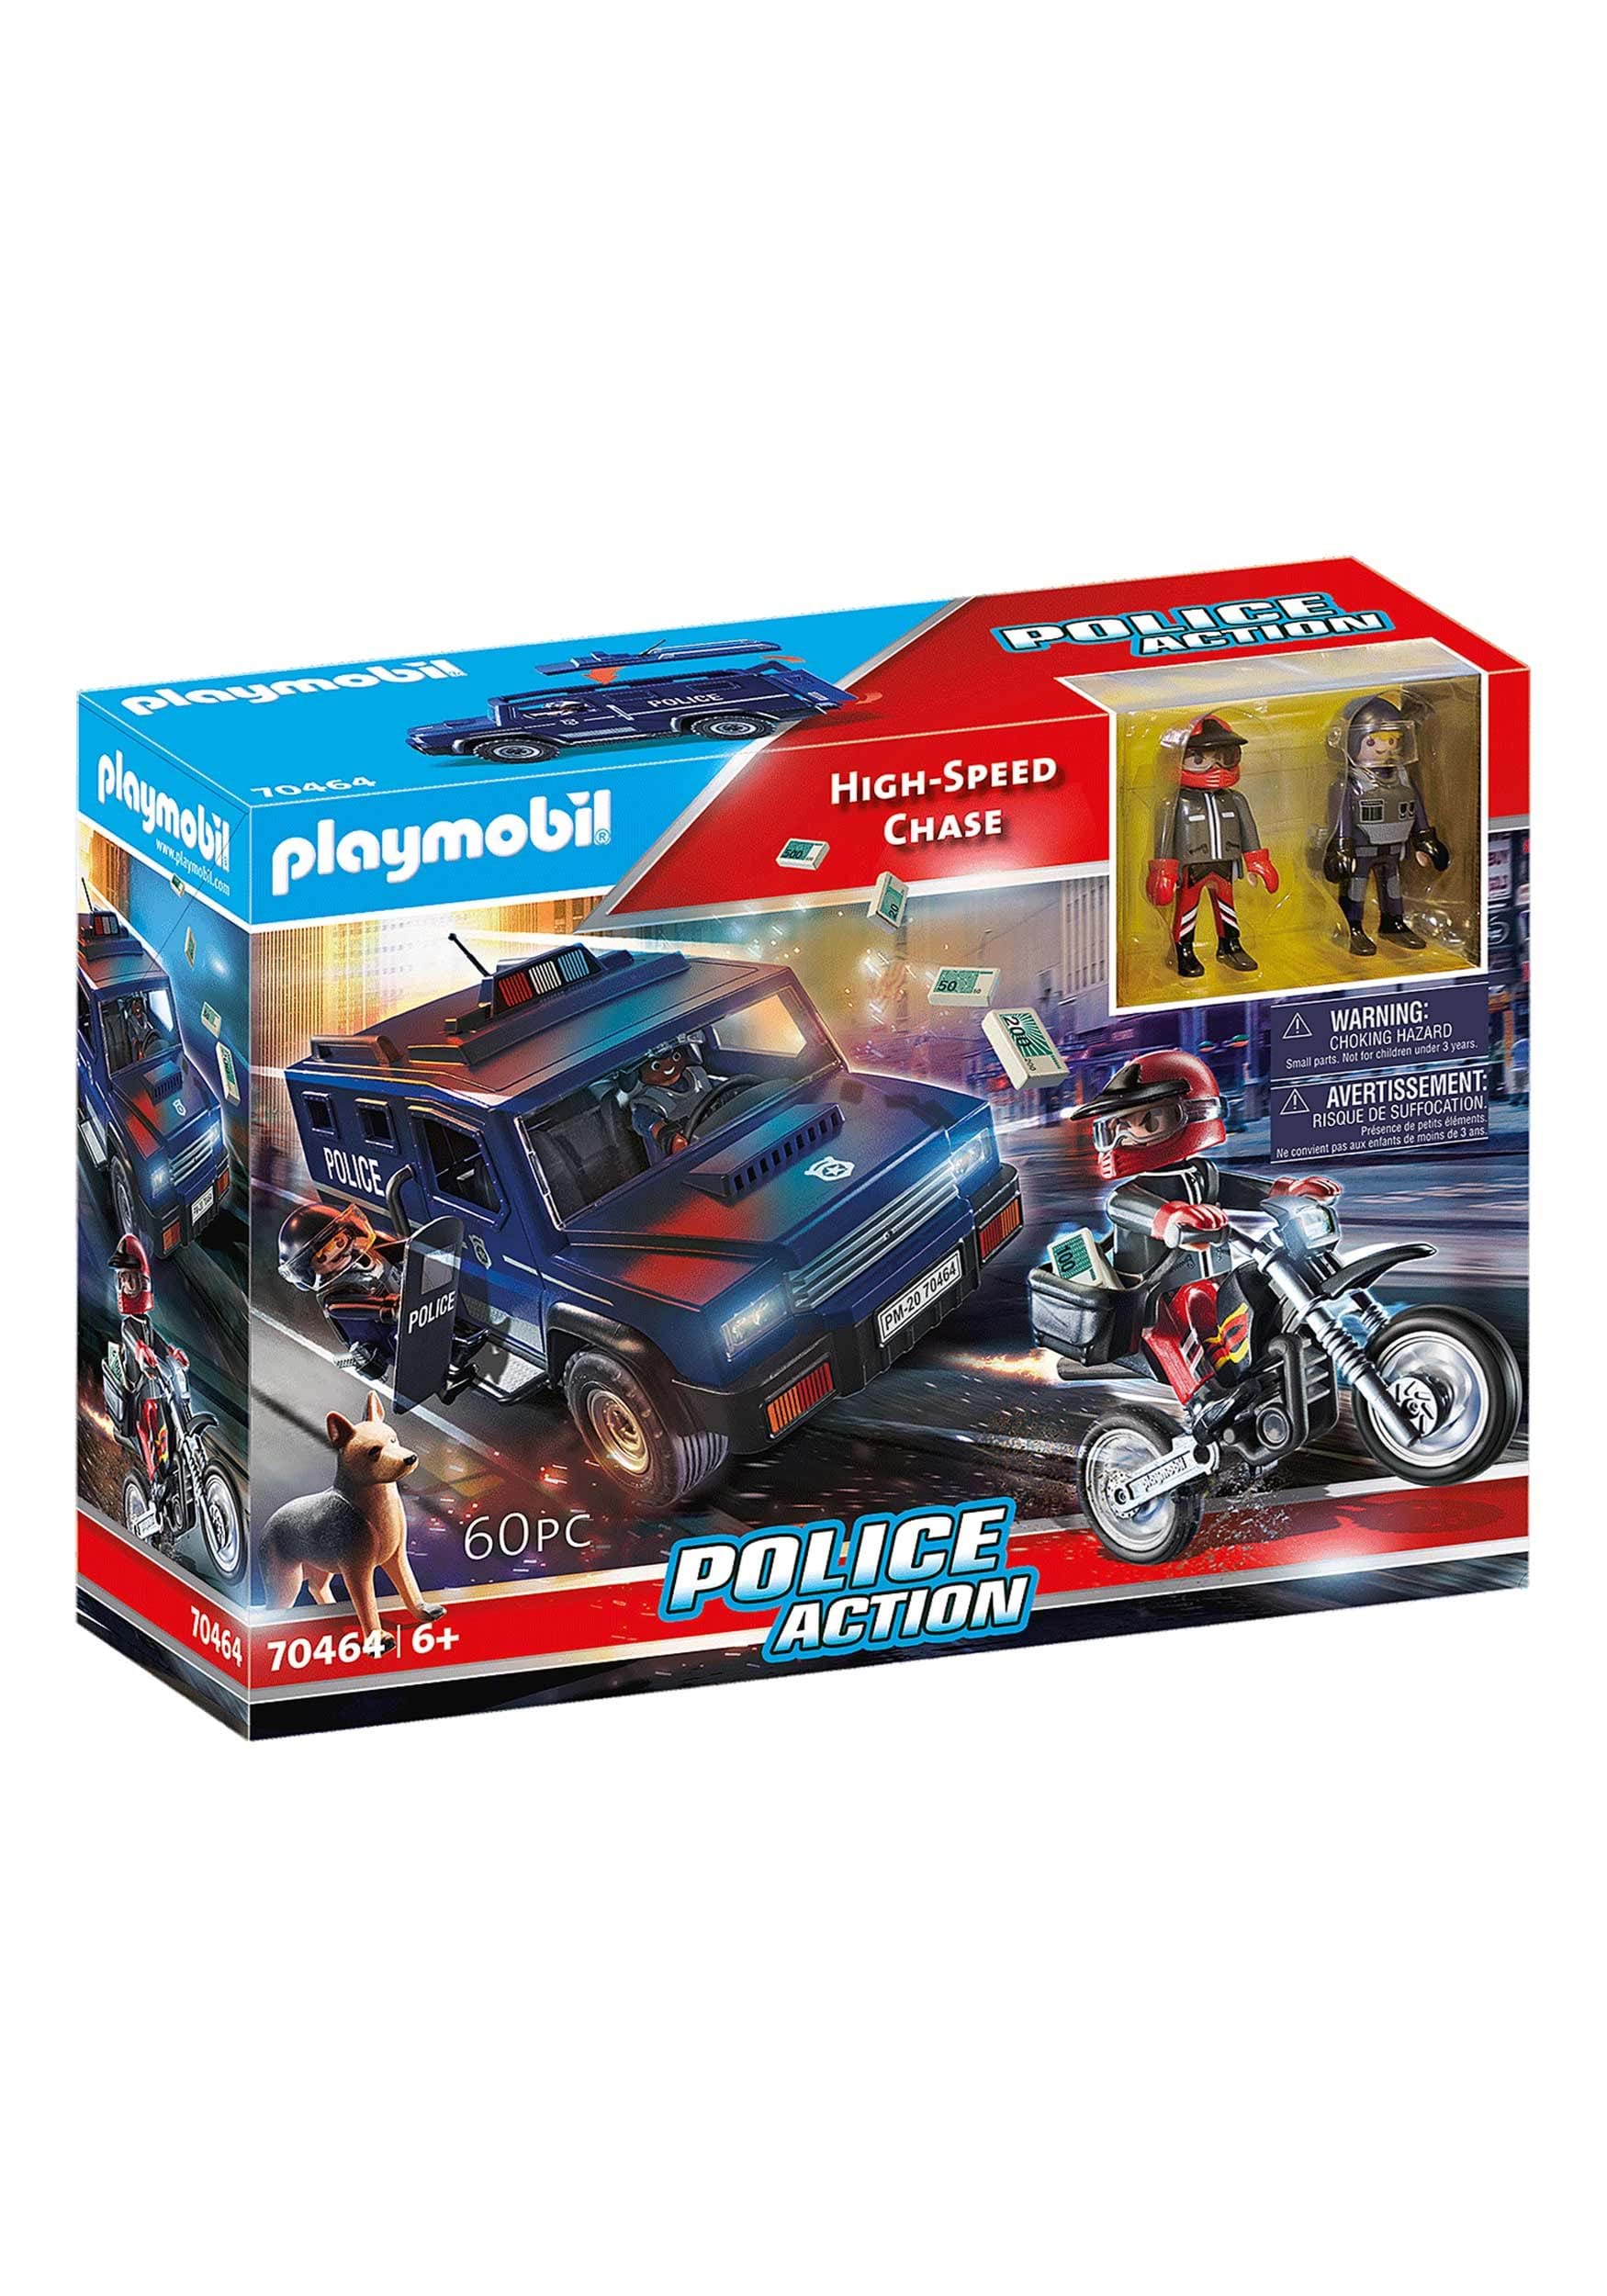 High-Speed Chase - Playmobil